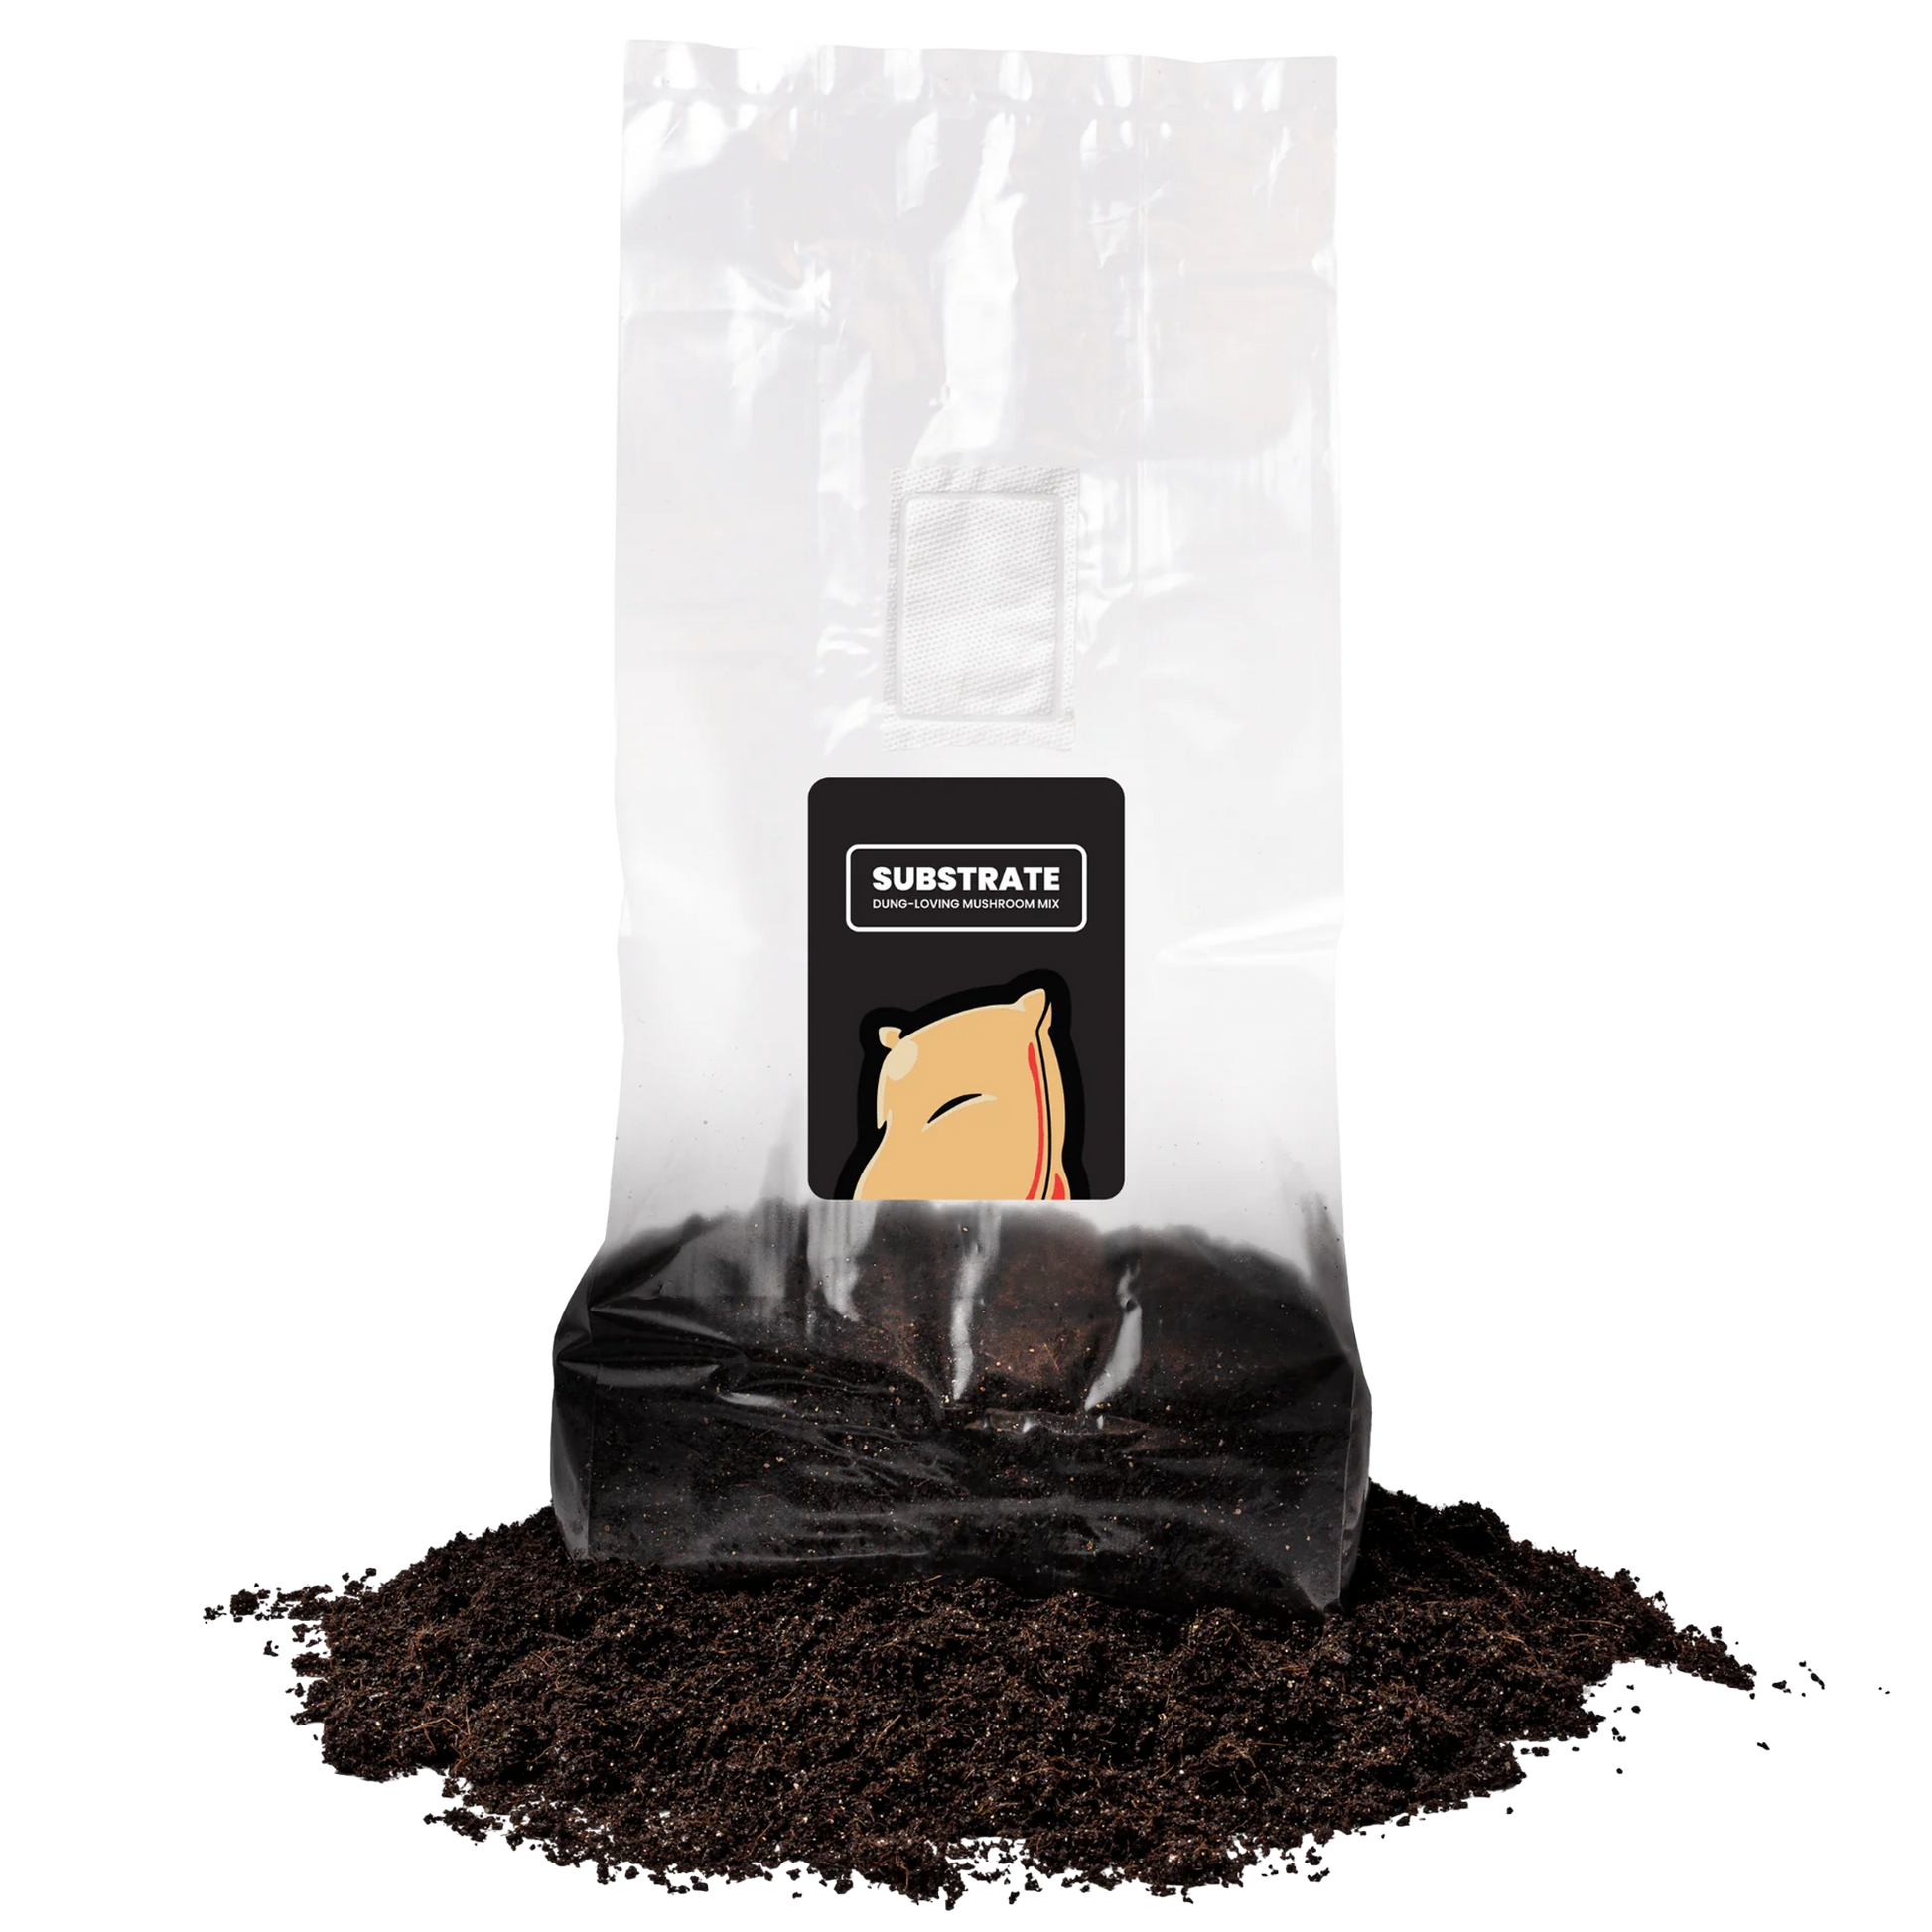 The substrate bag with contents spilling out, showcasing the dark, nutrient-rich composition for mushroom cultivation.